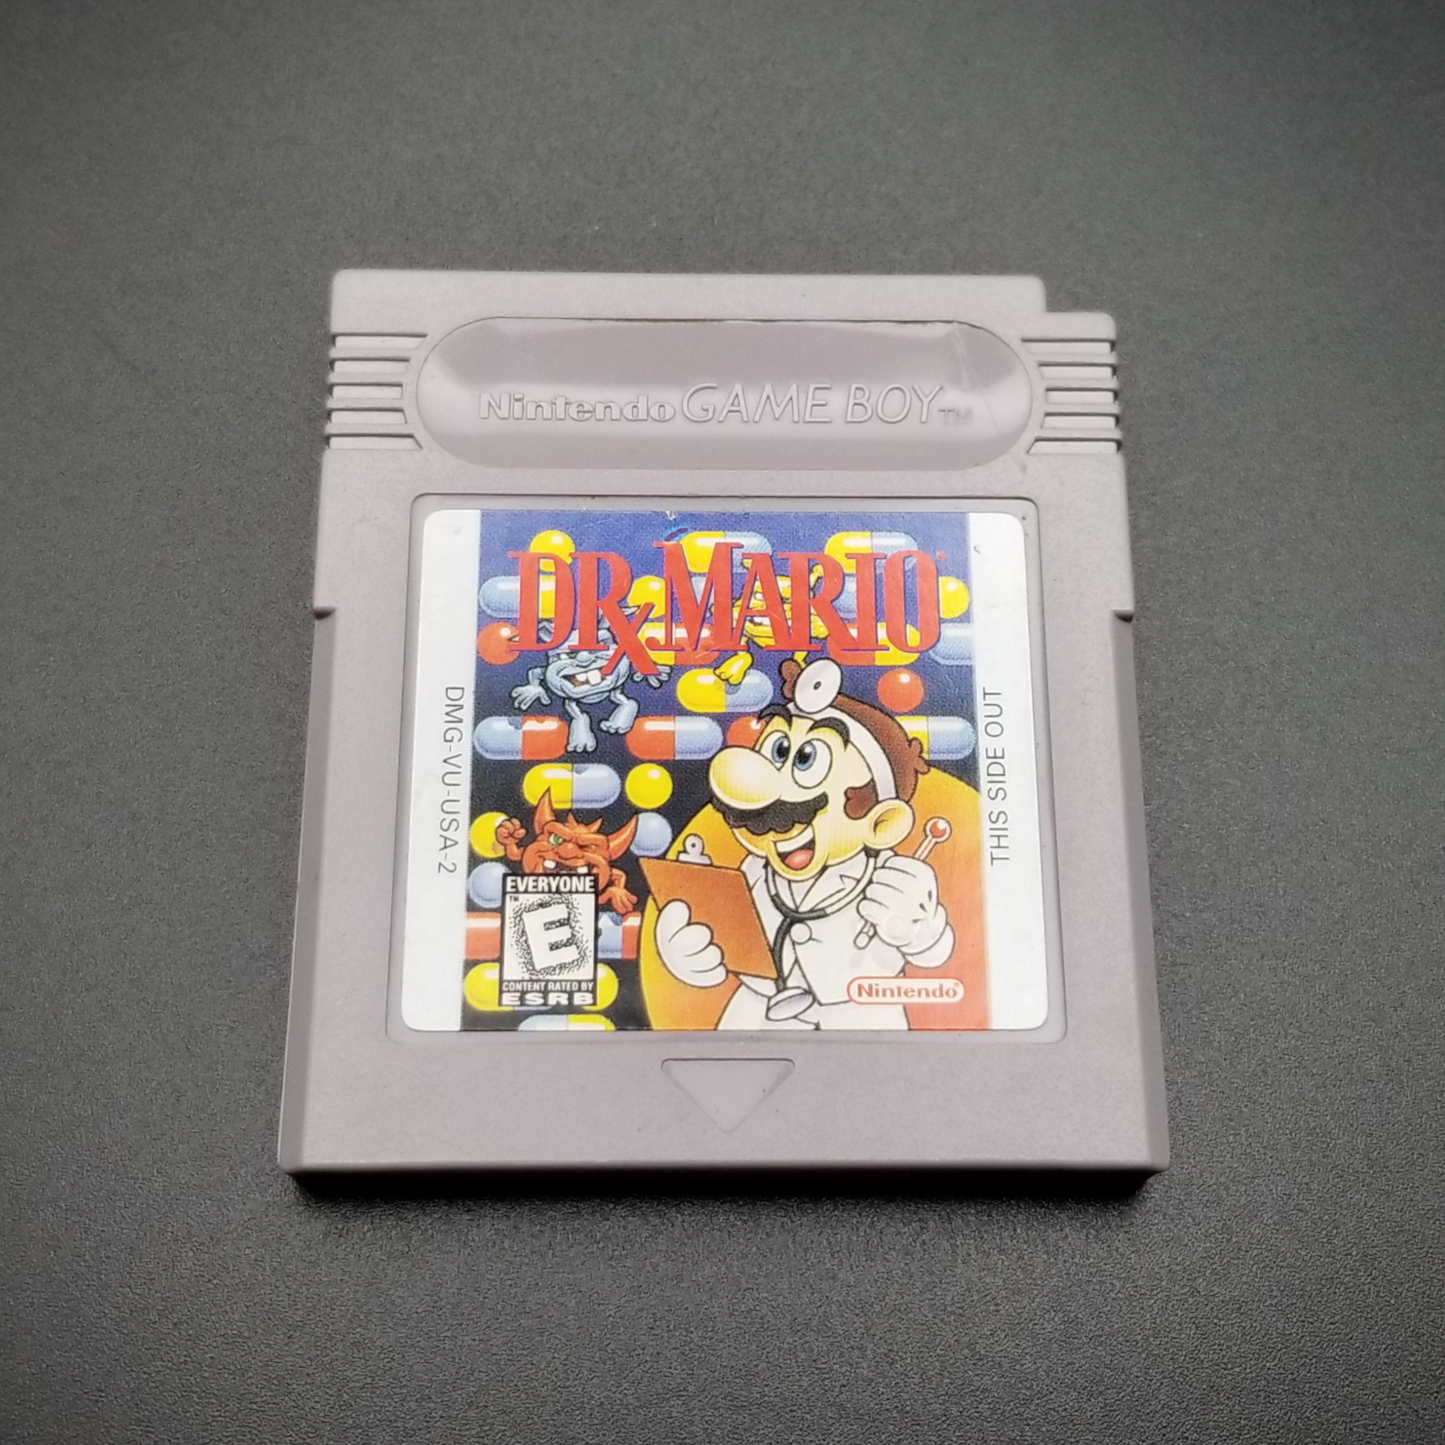 OUTLET - "Dr. Mario" Gameboy game cartridge